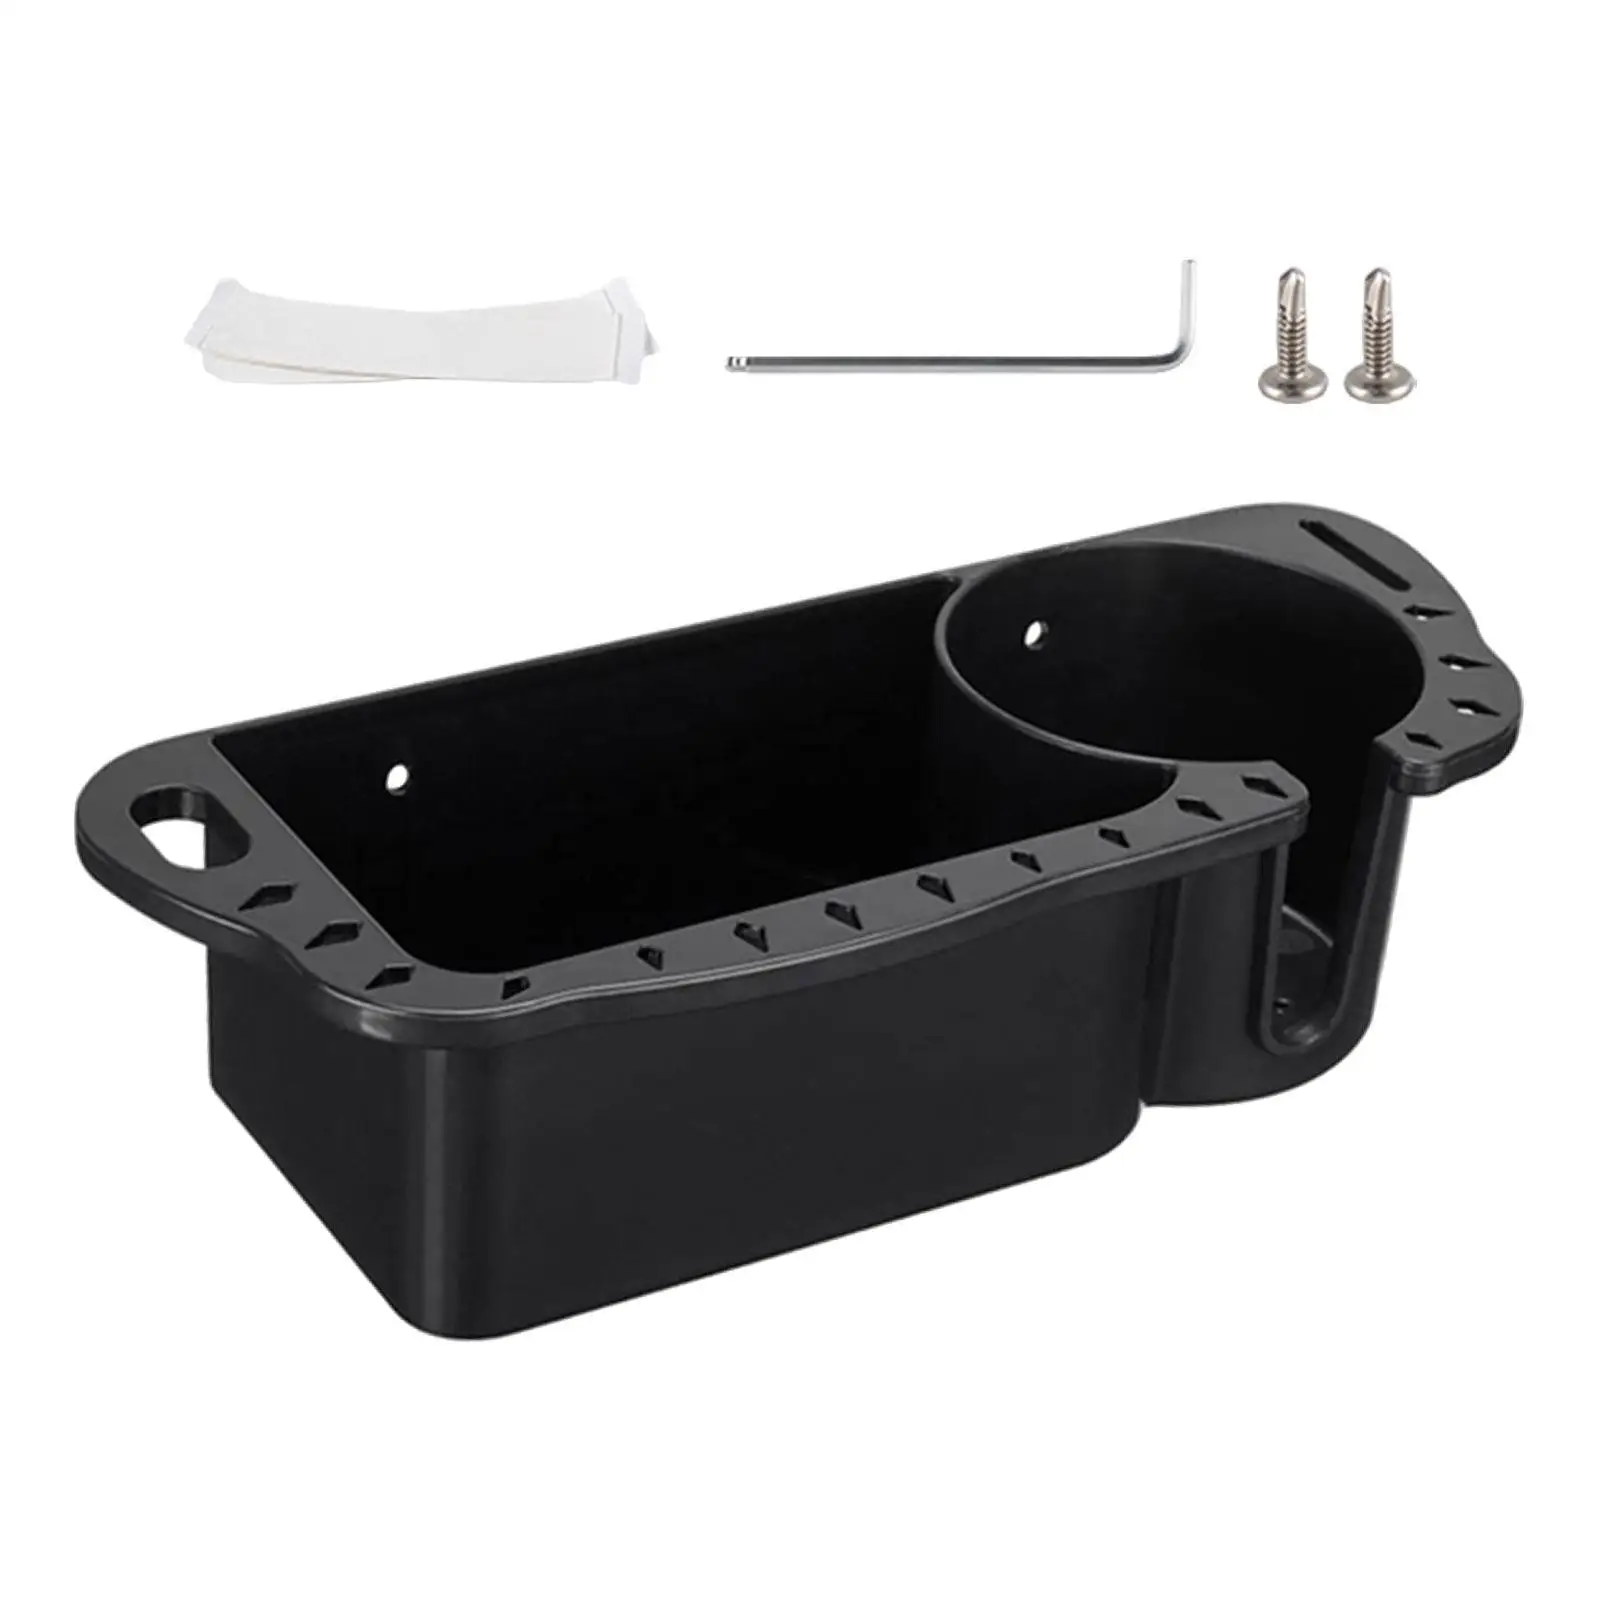 Boat Caddy Organizer Stable Marine Cup Holder Boat Seat Storage Caddy Boat Accessories for Kayak Fishing Bass Boat Pontoon